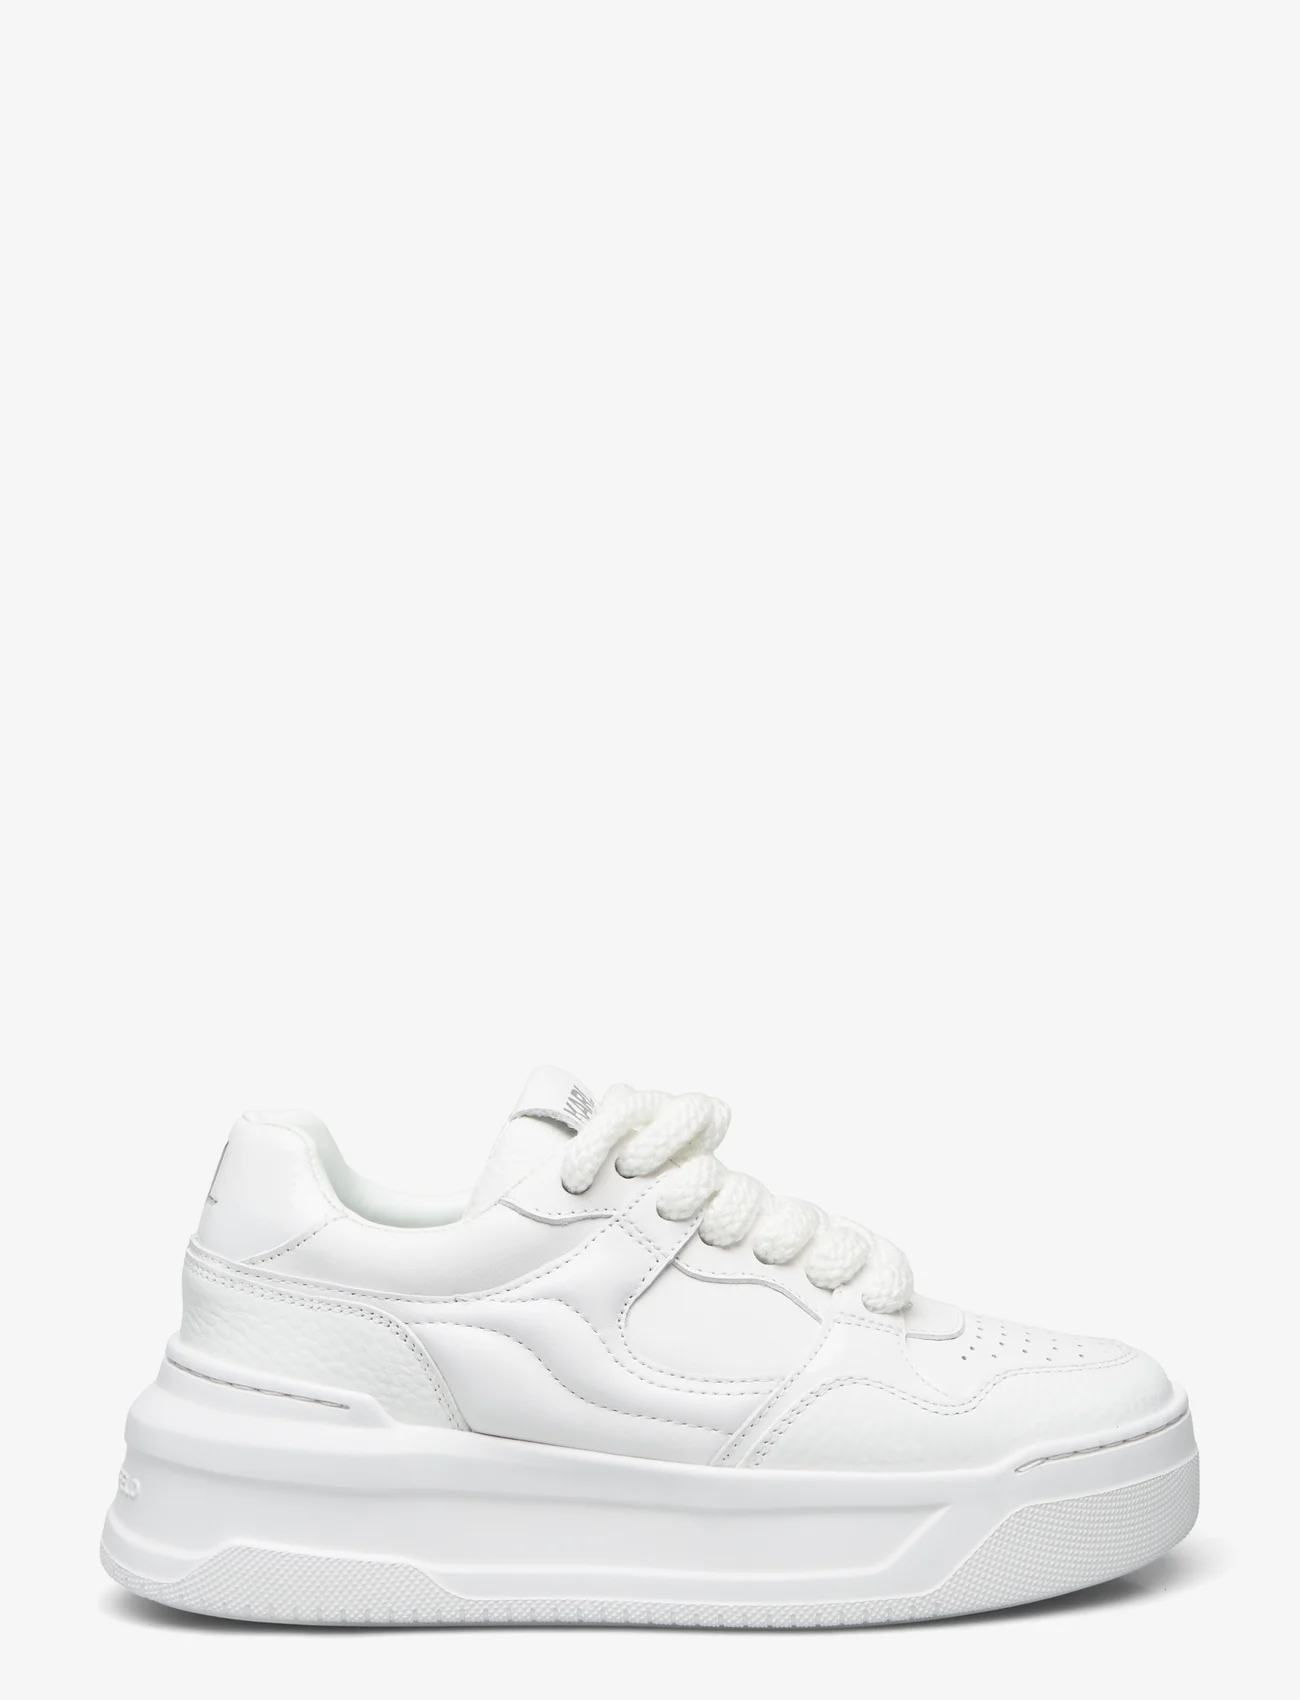 Karl Lagerfeld Shoes - KREW MAX KC - lave sneakers - white lthr - 1